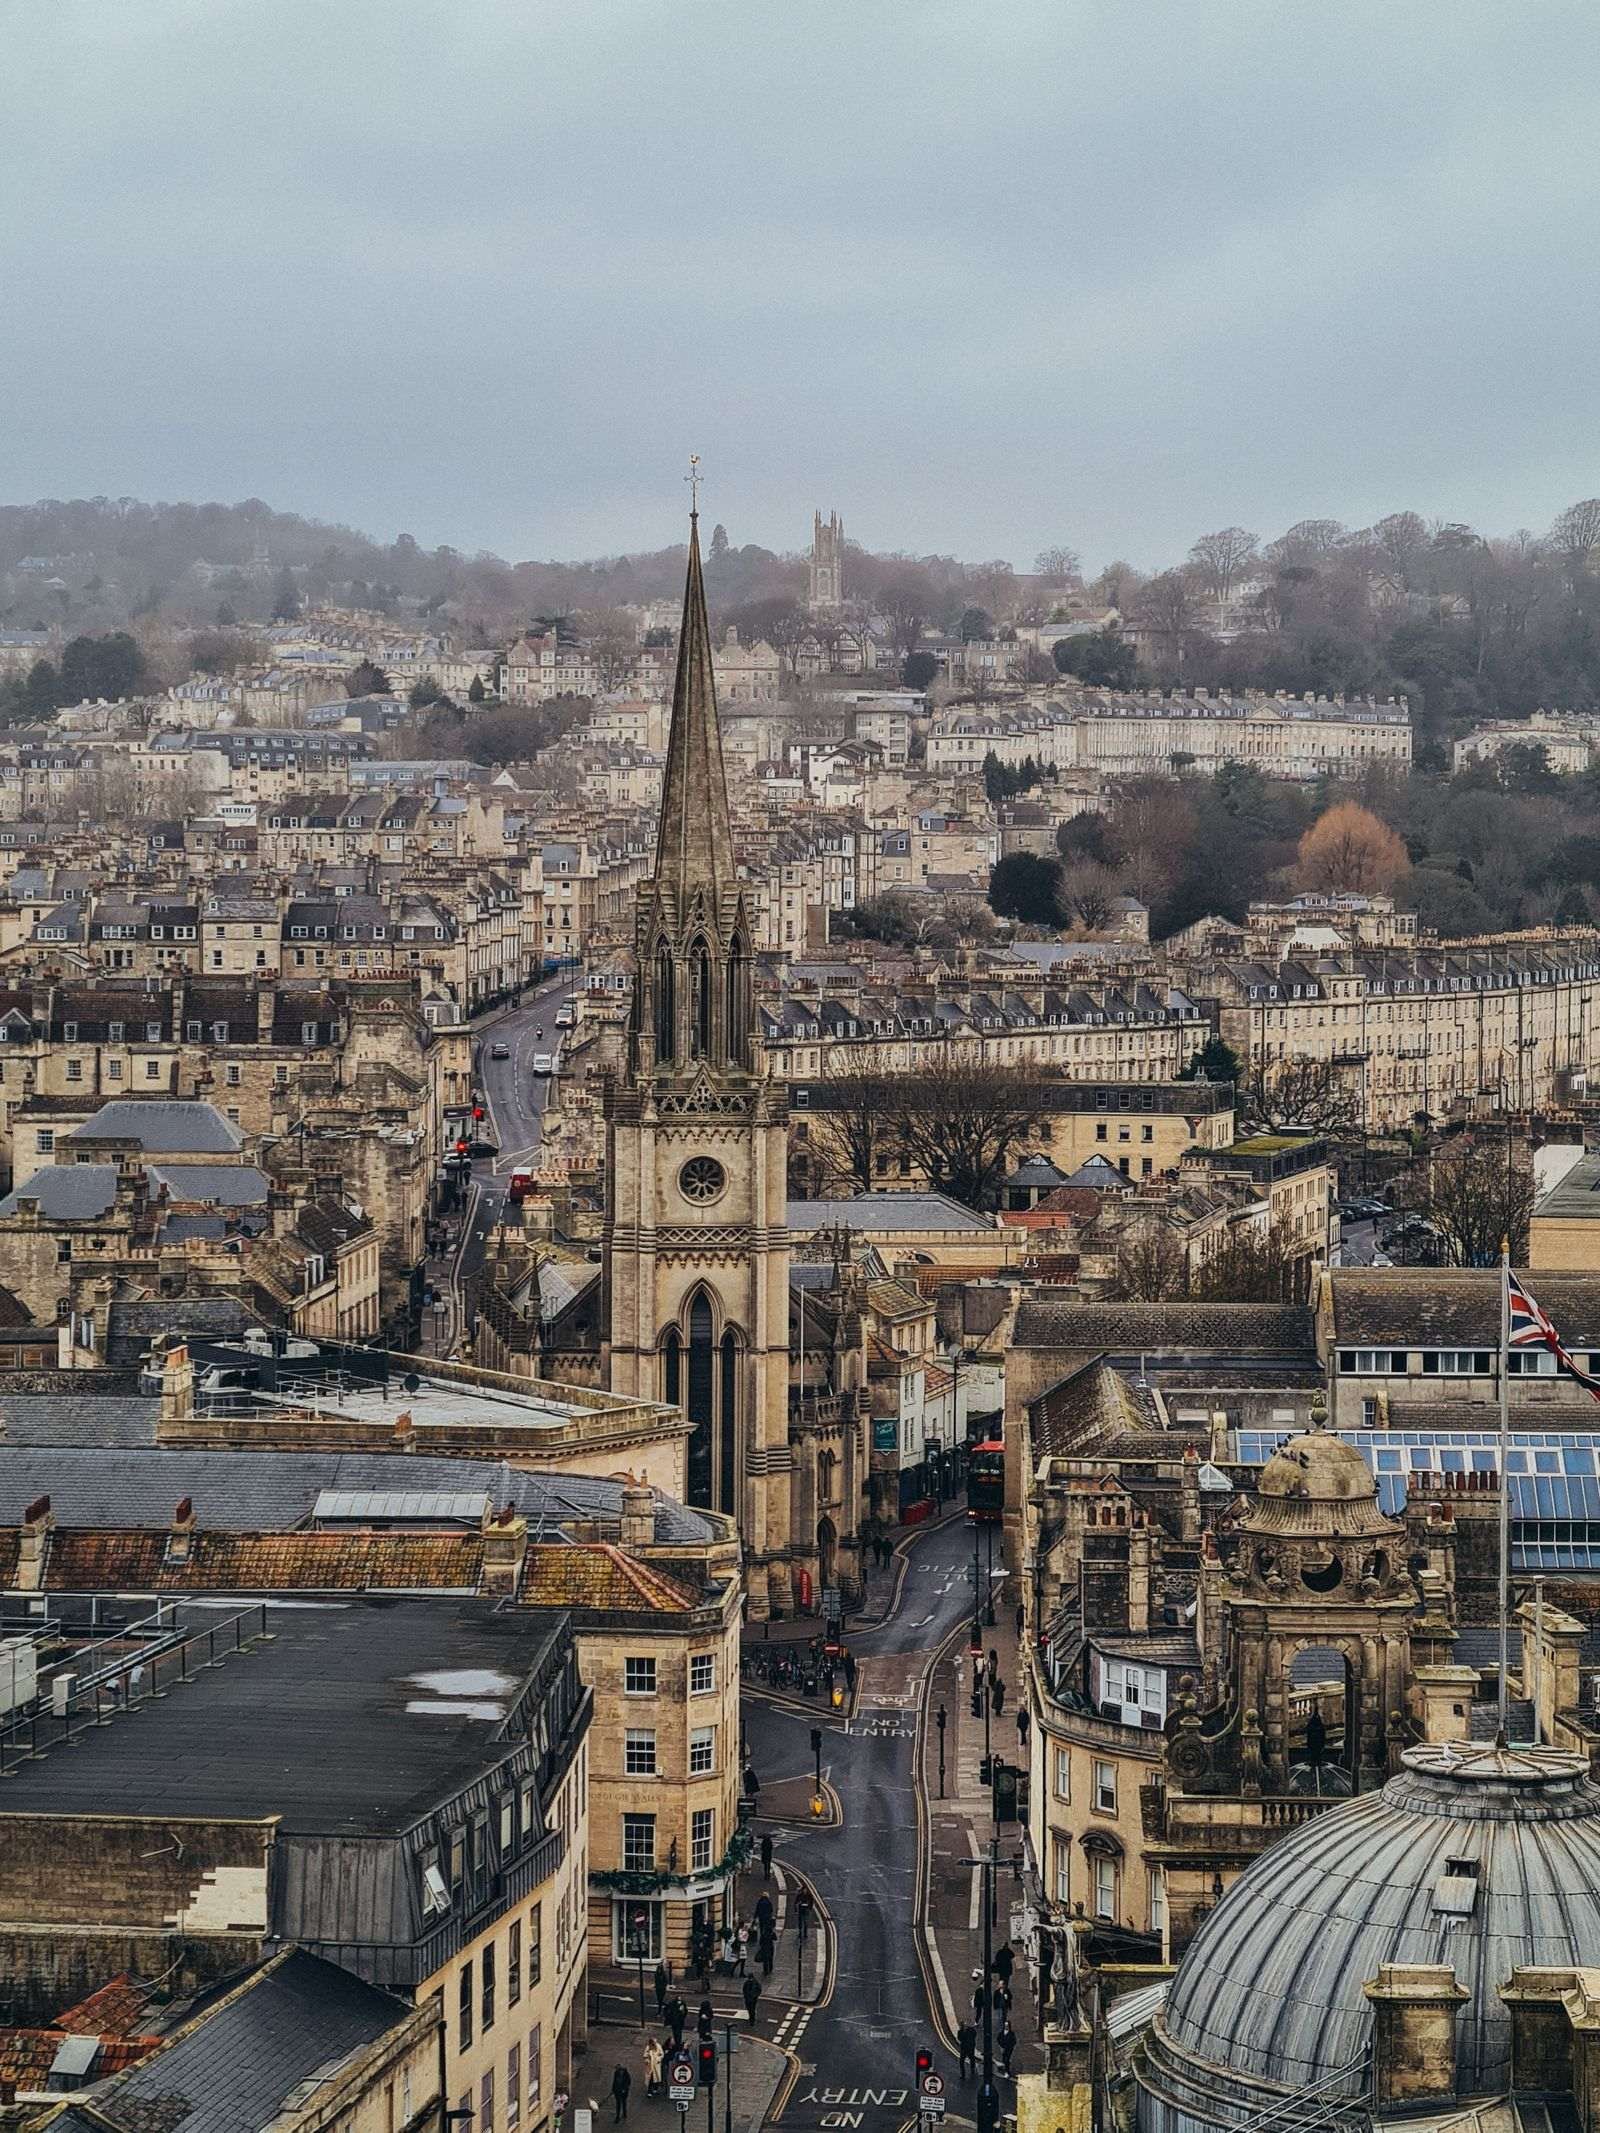 A view looking down onto bath city centre with roads snaking through many stone buildings and a large church in the middle